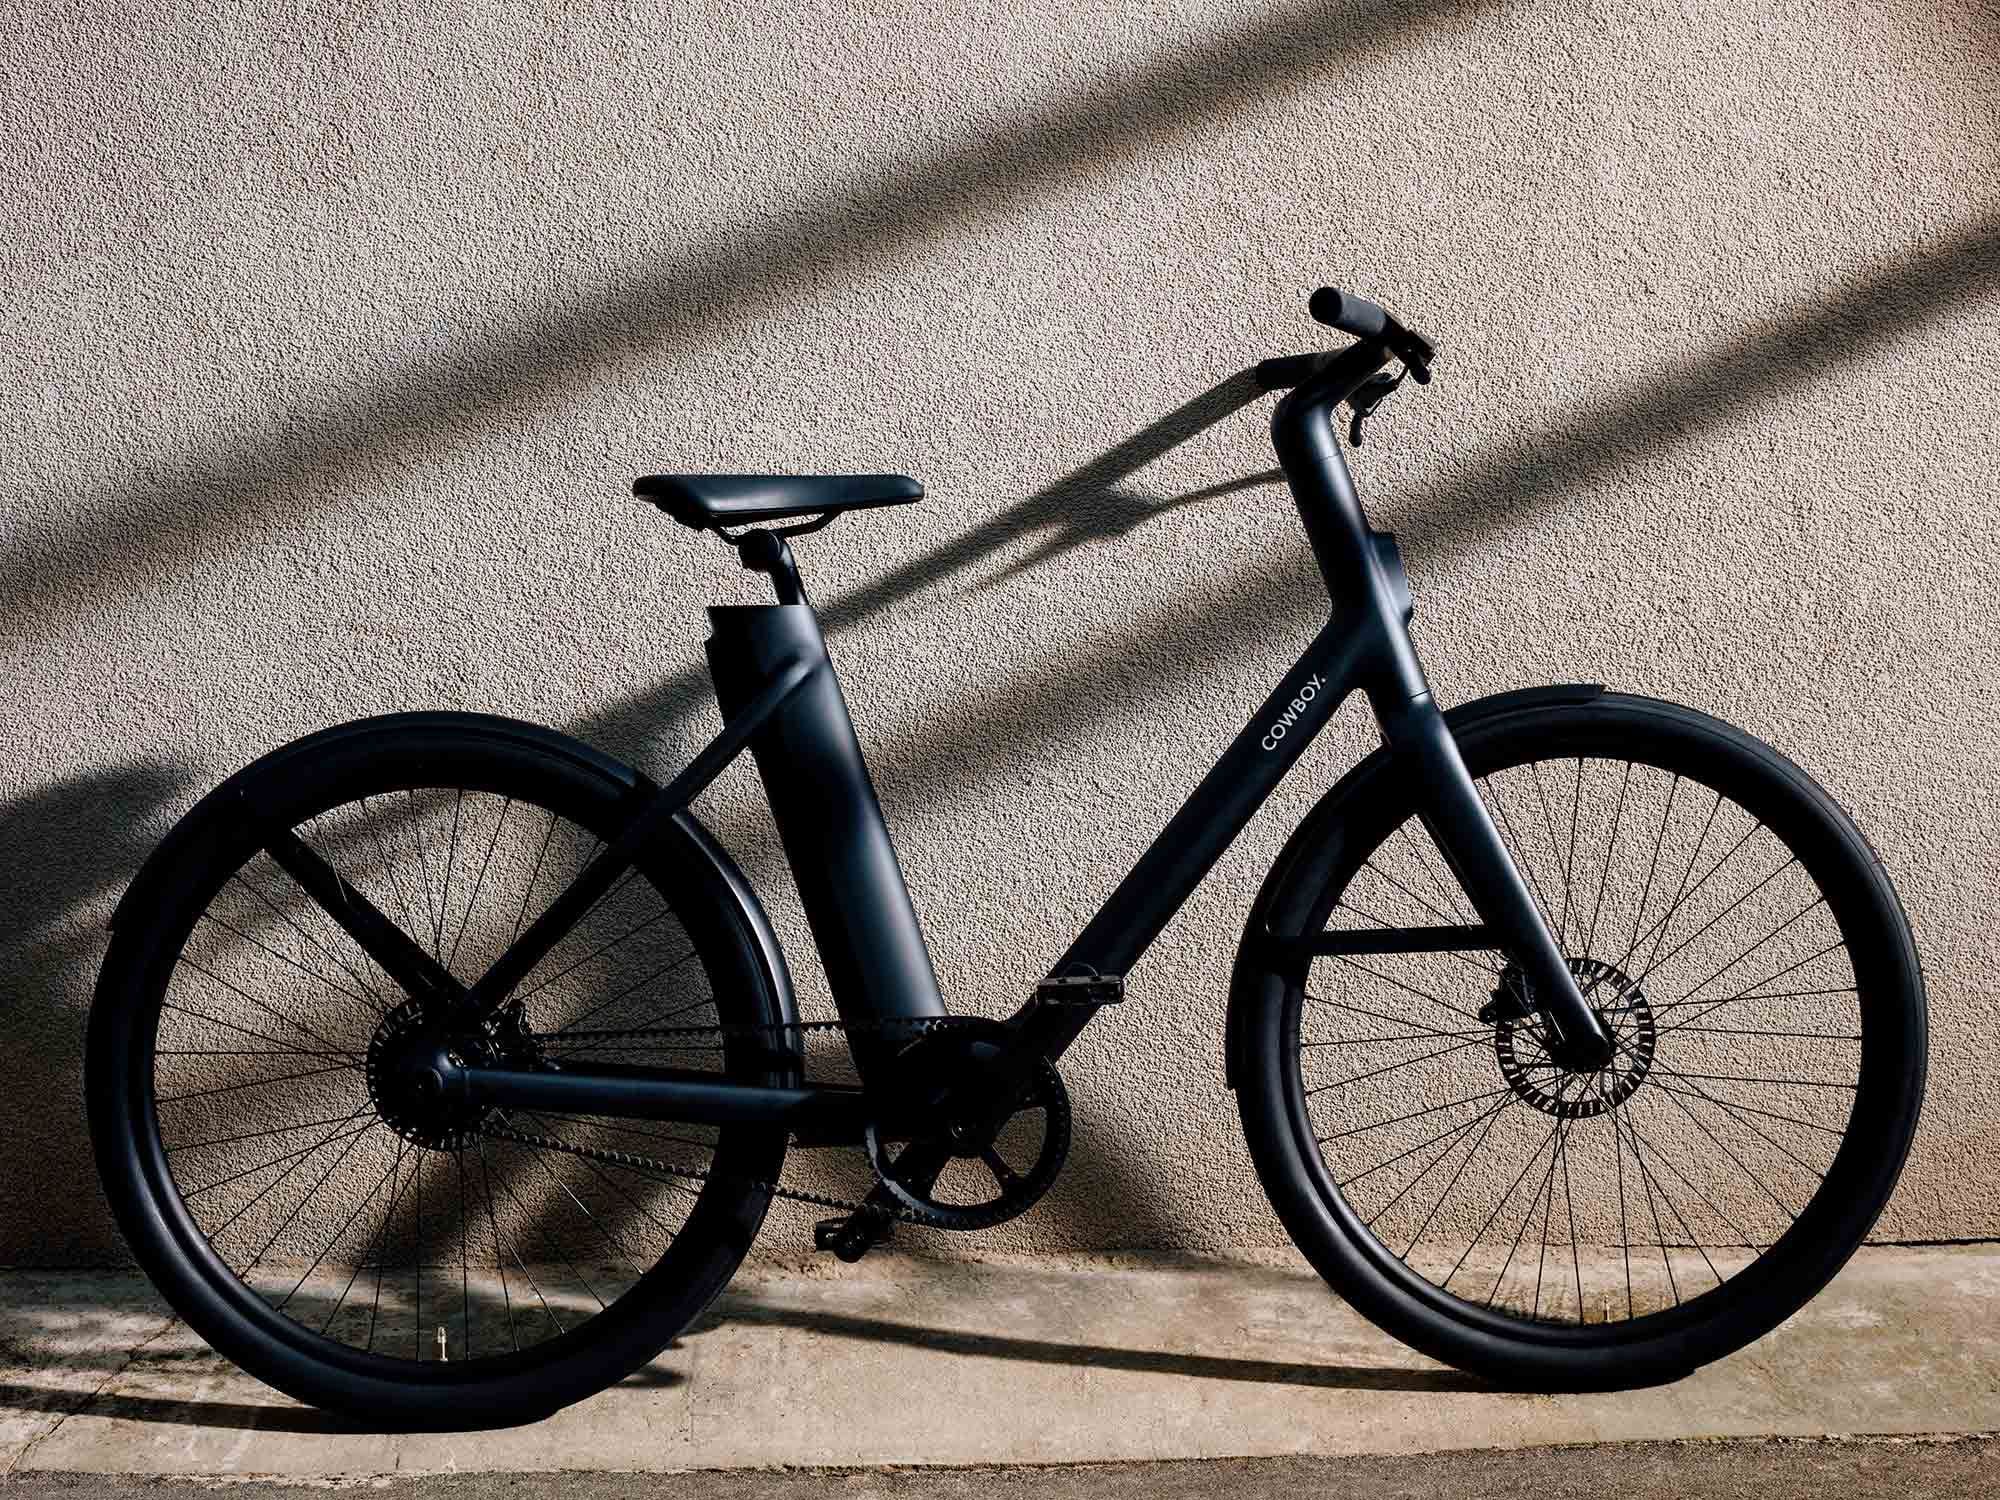 Cowboy 4 ST electric bike review: The best e-bike for city